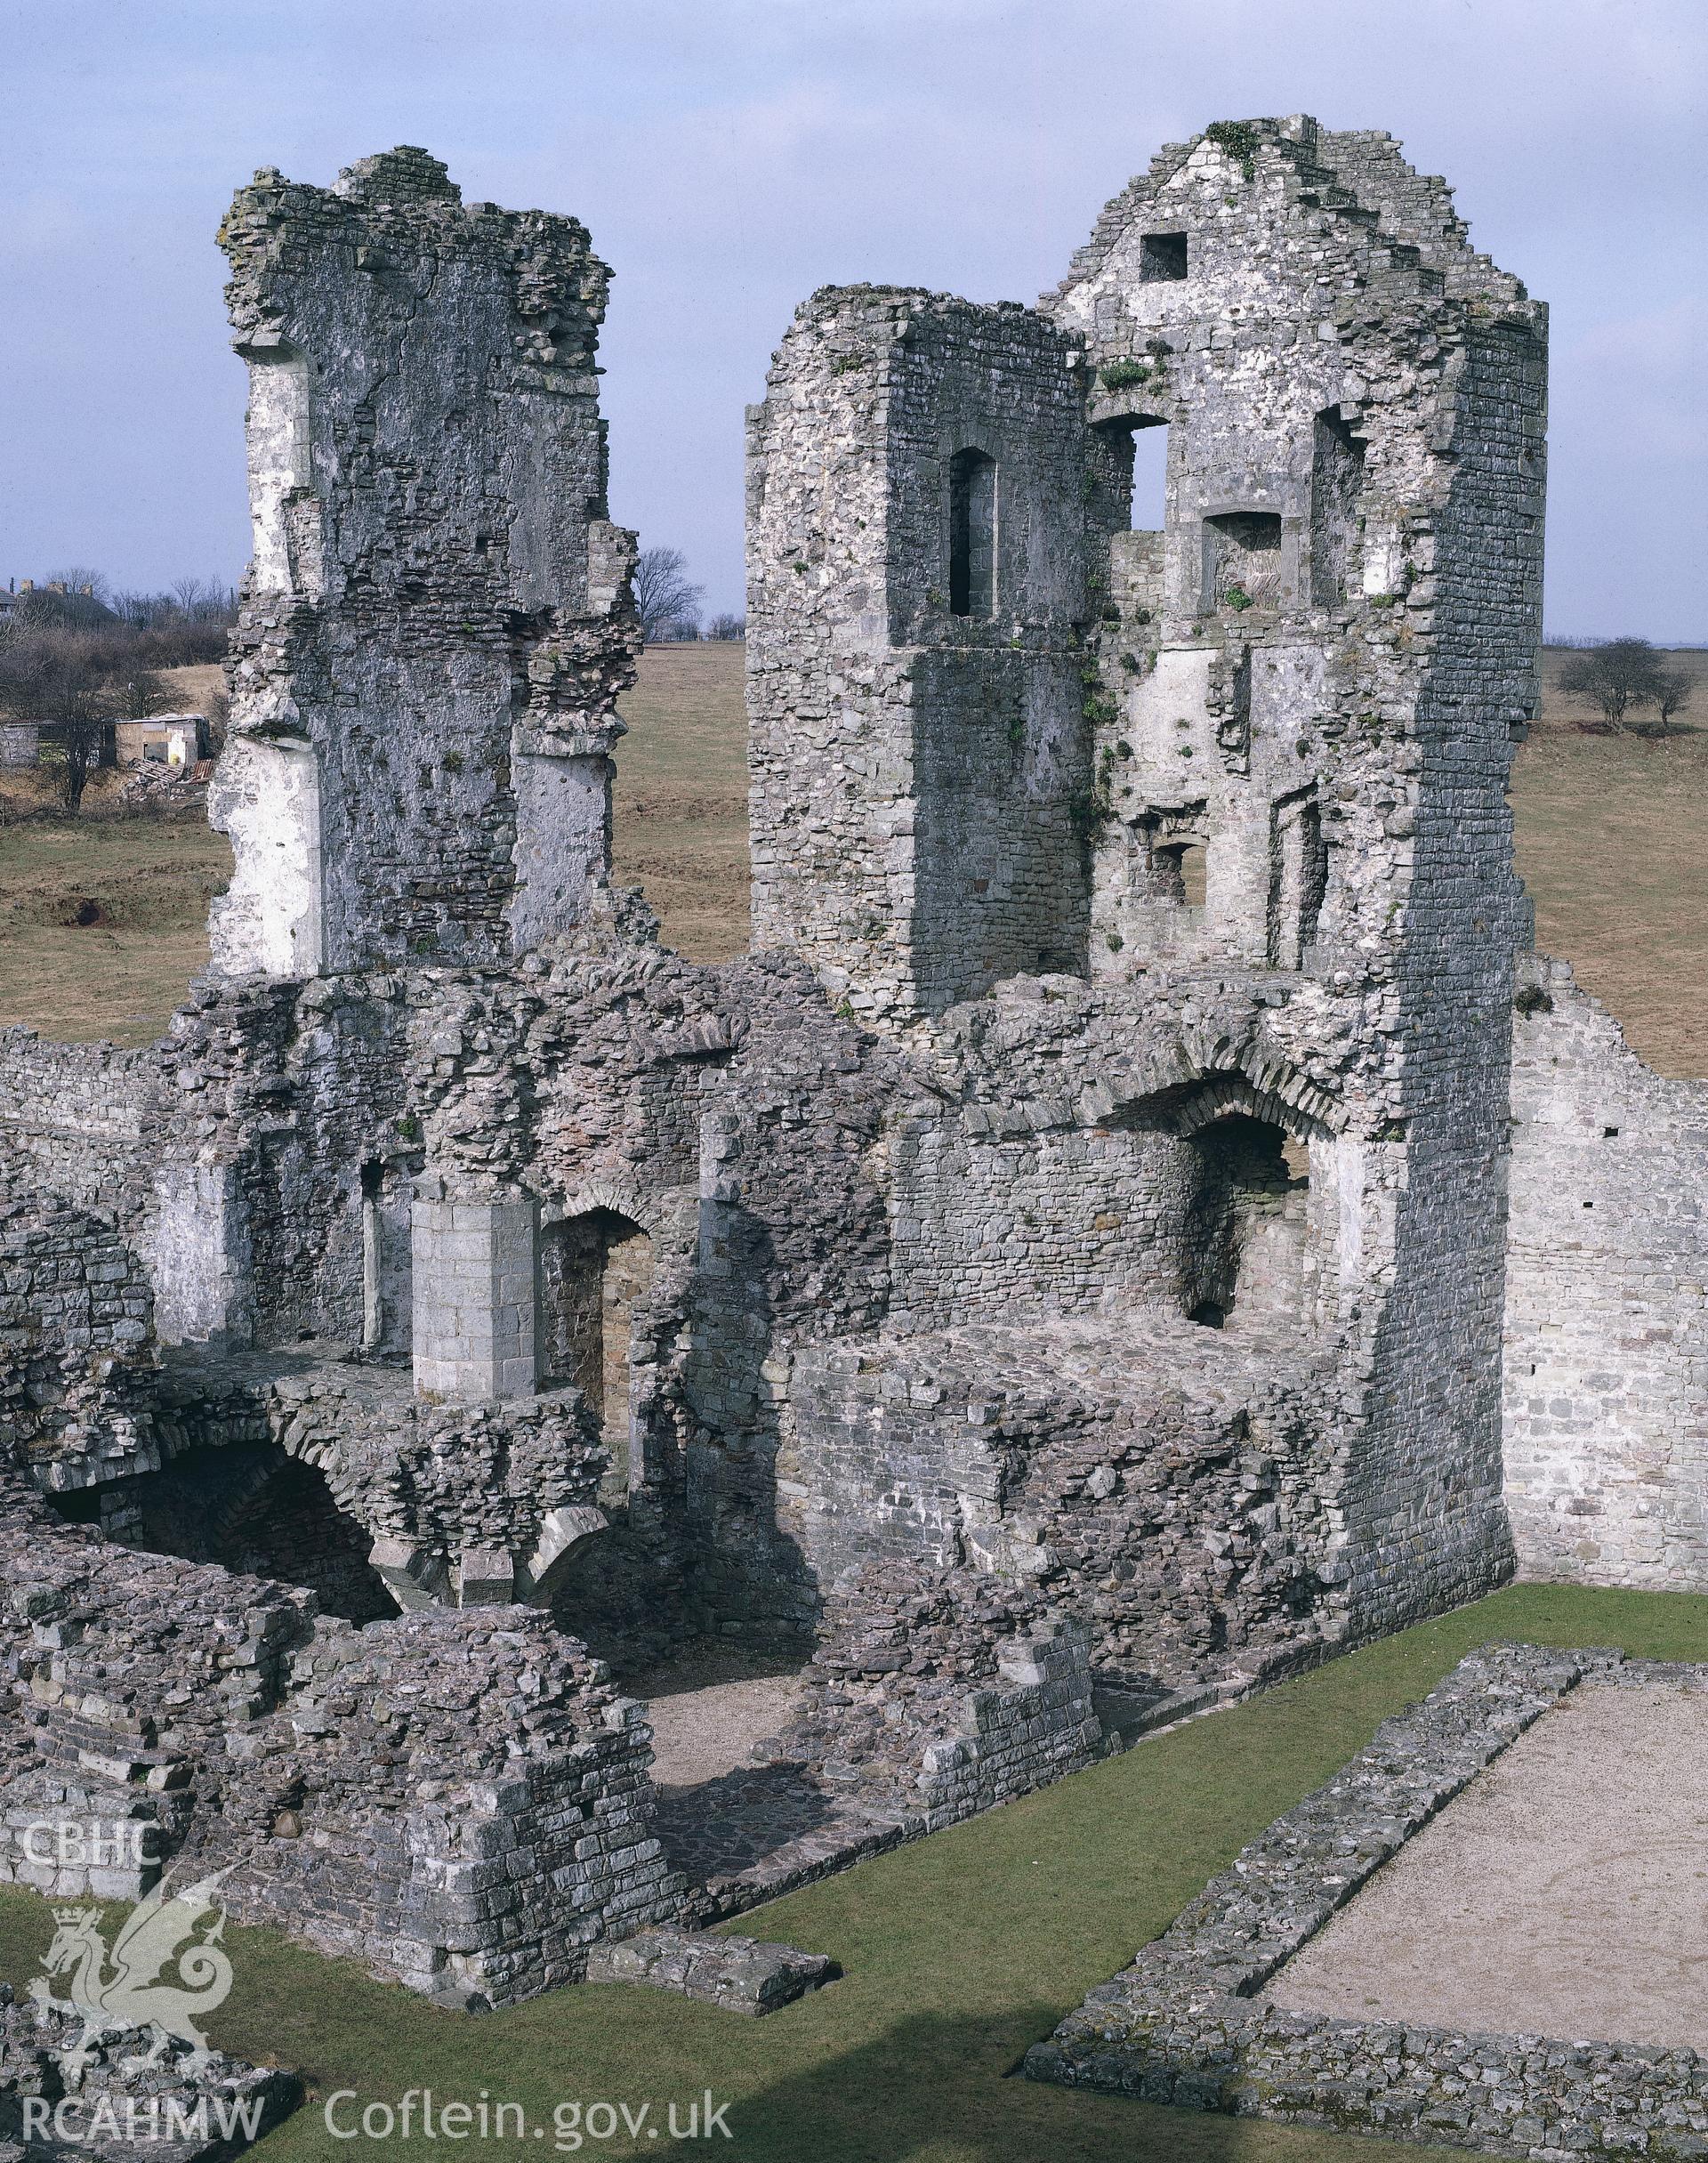 RCAHMW colour transparency showing view of Coity Castle.